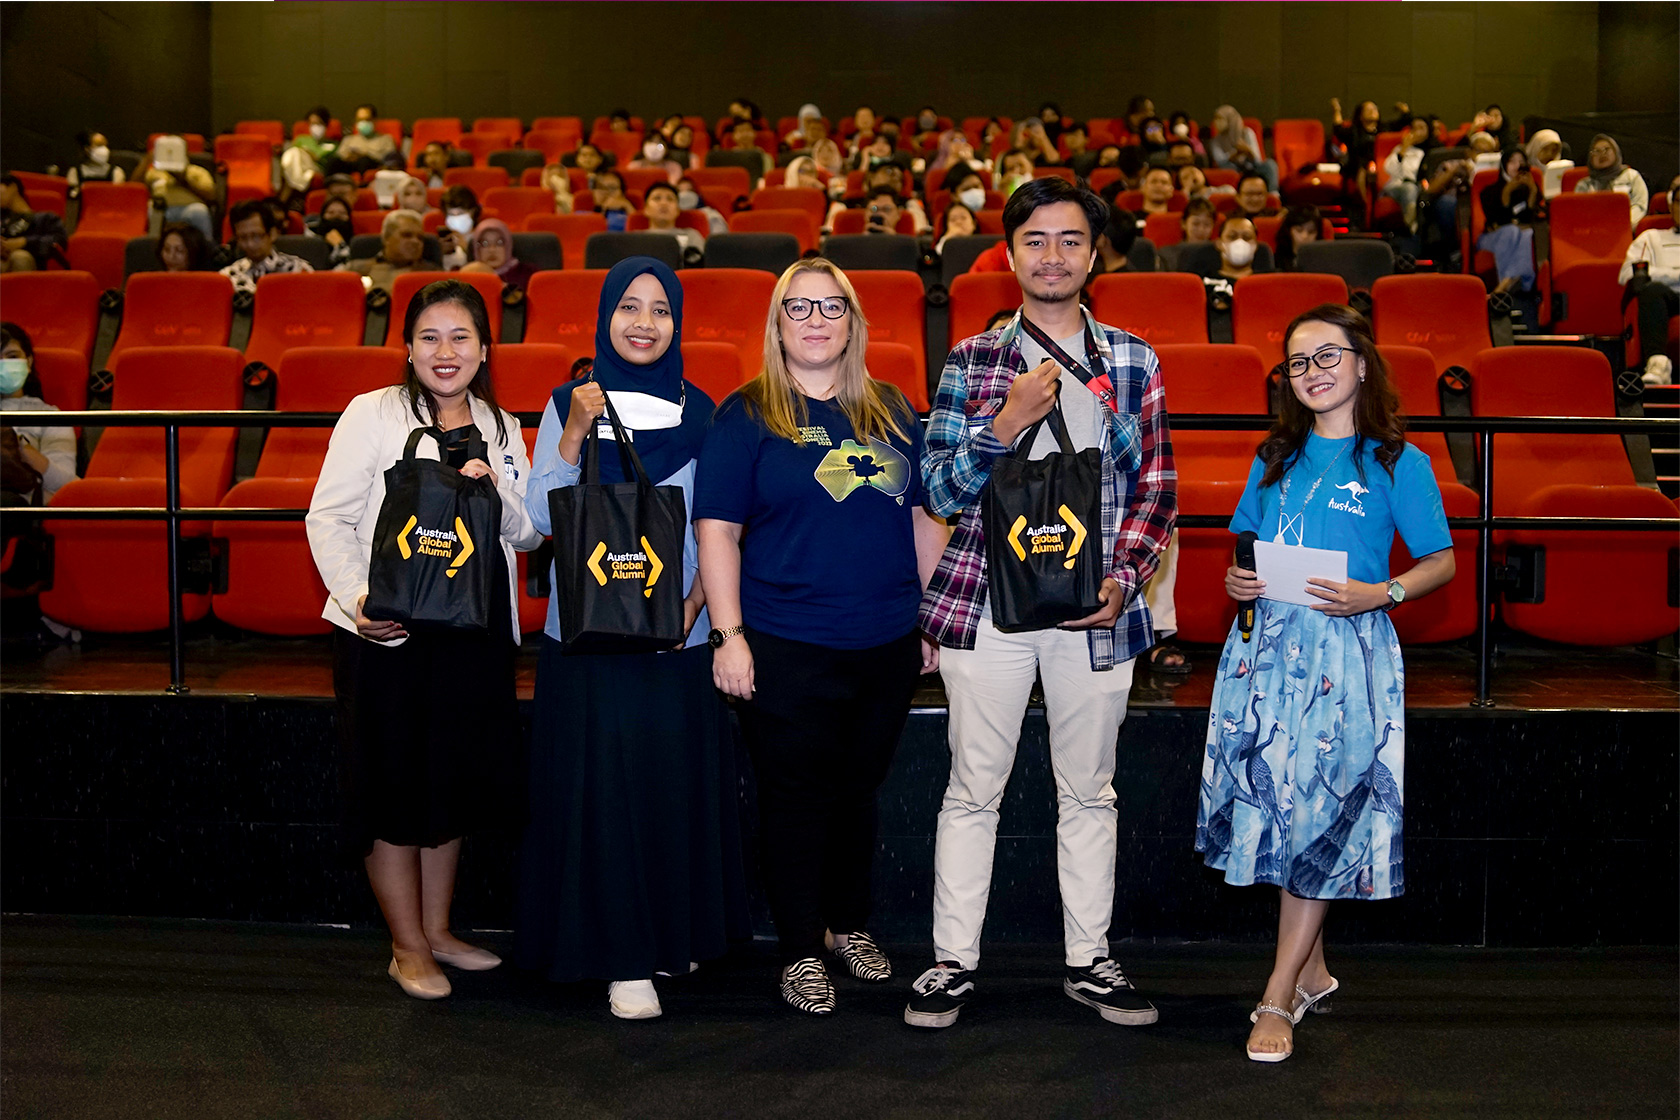 The Quiz winners for “Nobar” in Yogyakarta took a picture with Amanda Panayotou, Second Secretary of Public Diplomacy, Australian Embassy in Indonesia.